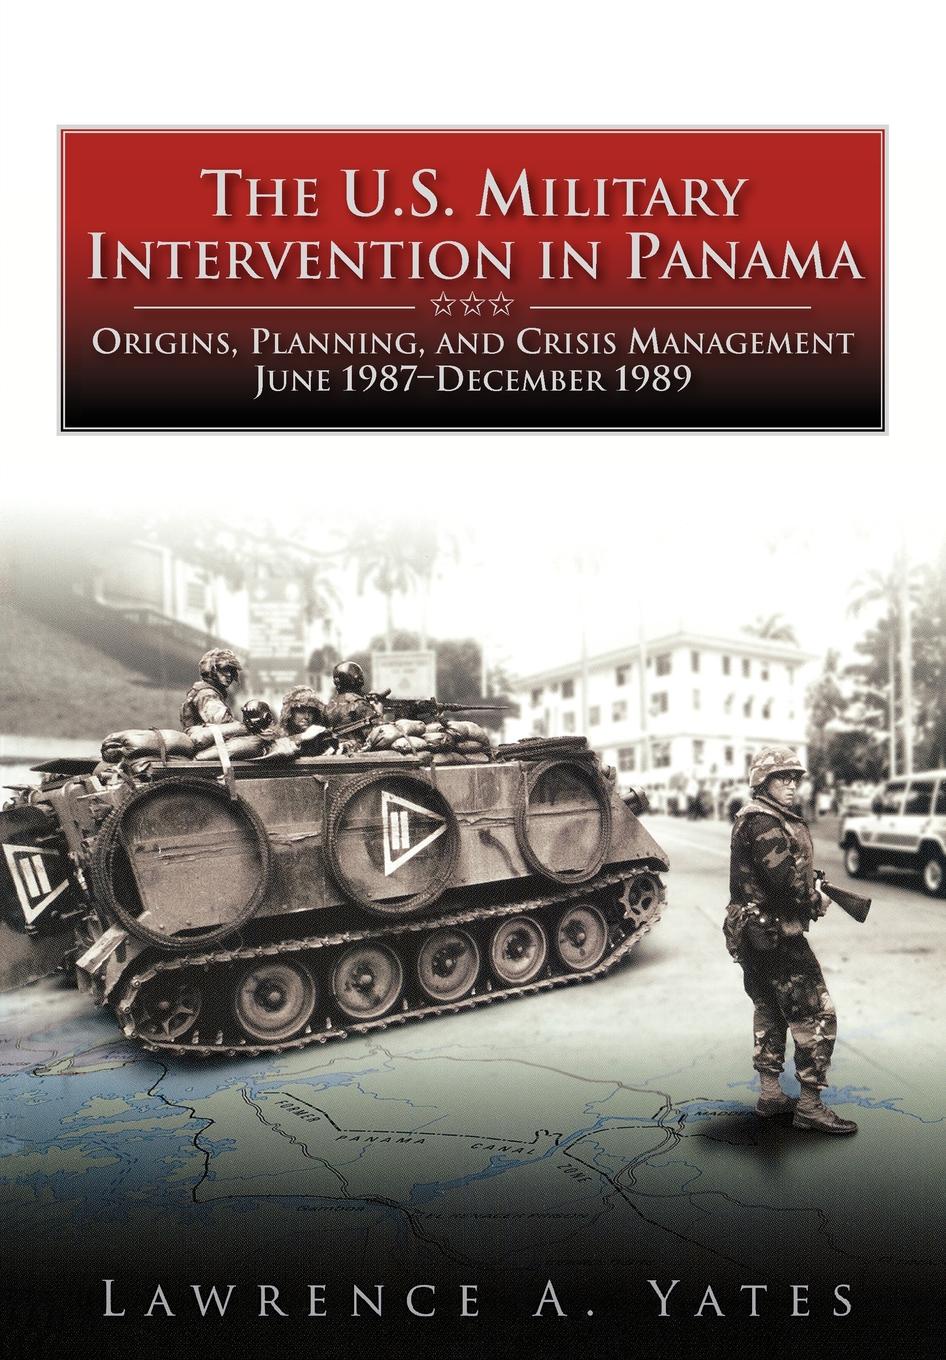 The U.S. Military Intervention in Panama. Origins, Planning, and Crisis Management, June 1987-December 1989